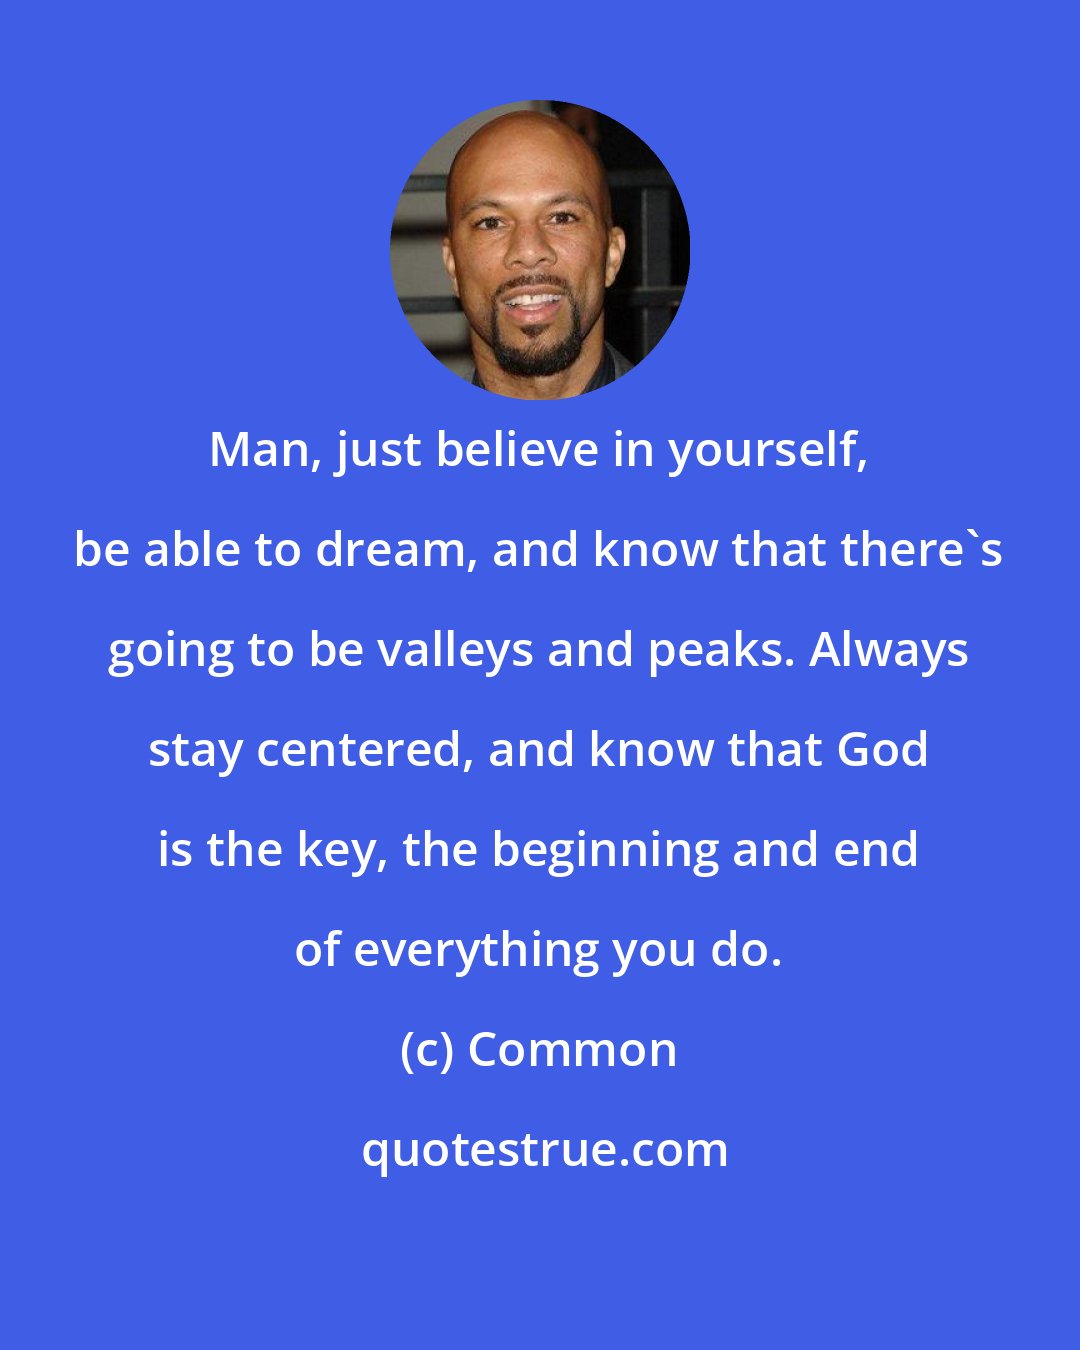 Common: Man, just believe in yourself, be able to dream, and know that there's going to be valleys and peaks. Always stay centered, and know that God is the key, the beginning and end of everything you do.